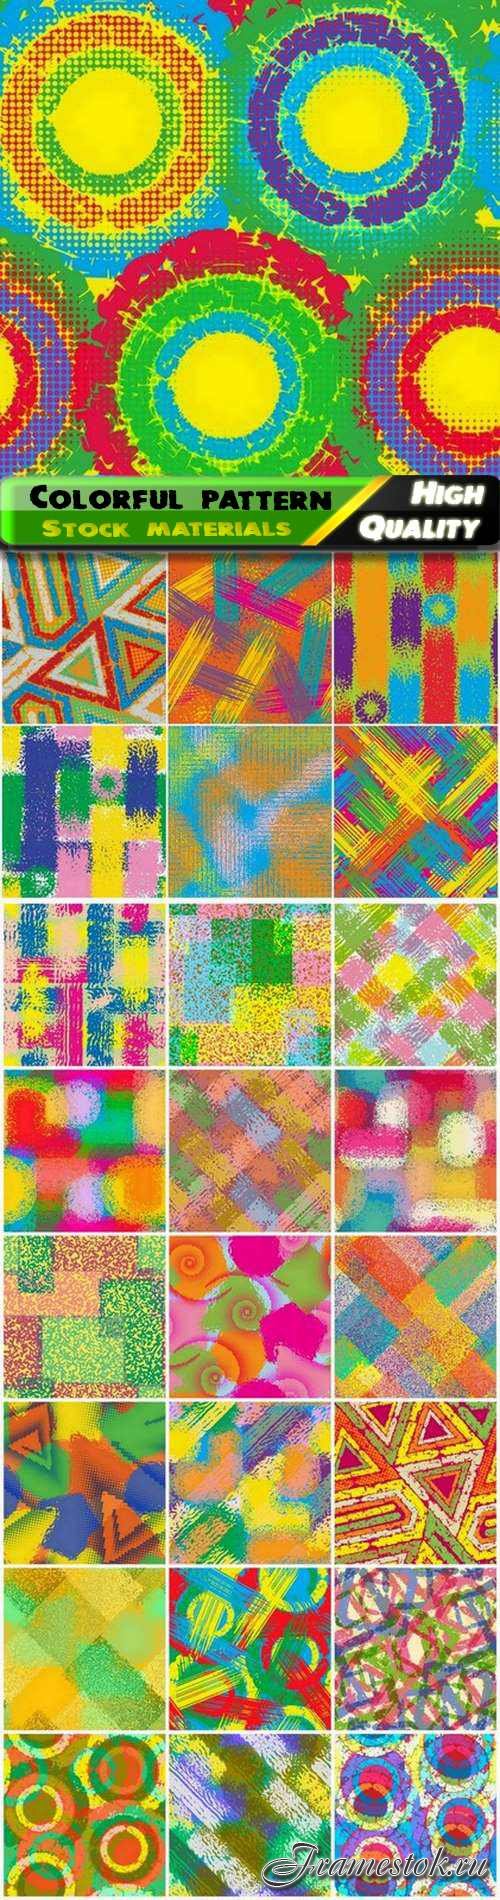 Colorful seamless pattern for textile and wallpaper design 25 Eps